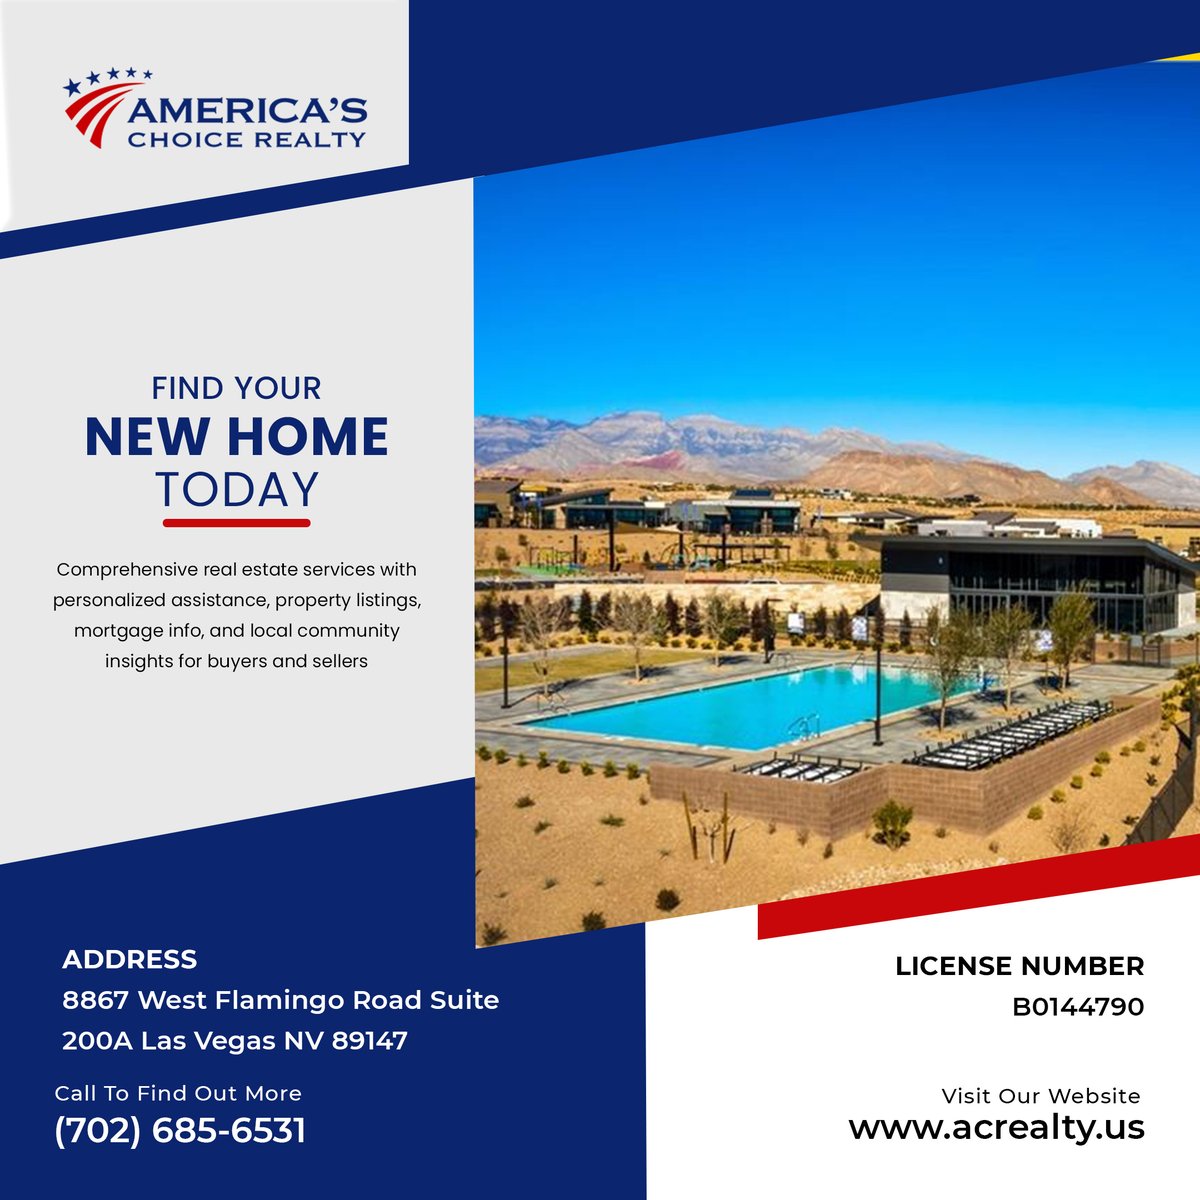 Find the house of your dreams right now! With our extensive real estate listings, your ideal space is waiting for you.
.
.

.
.
.
#realestateusa #realestate #realestateagent #realestateinvesting #realestatelife #realestateinvestor #realestatebroker #realestategoals